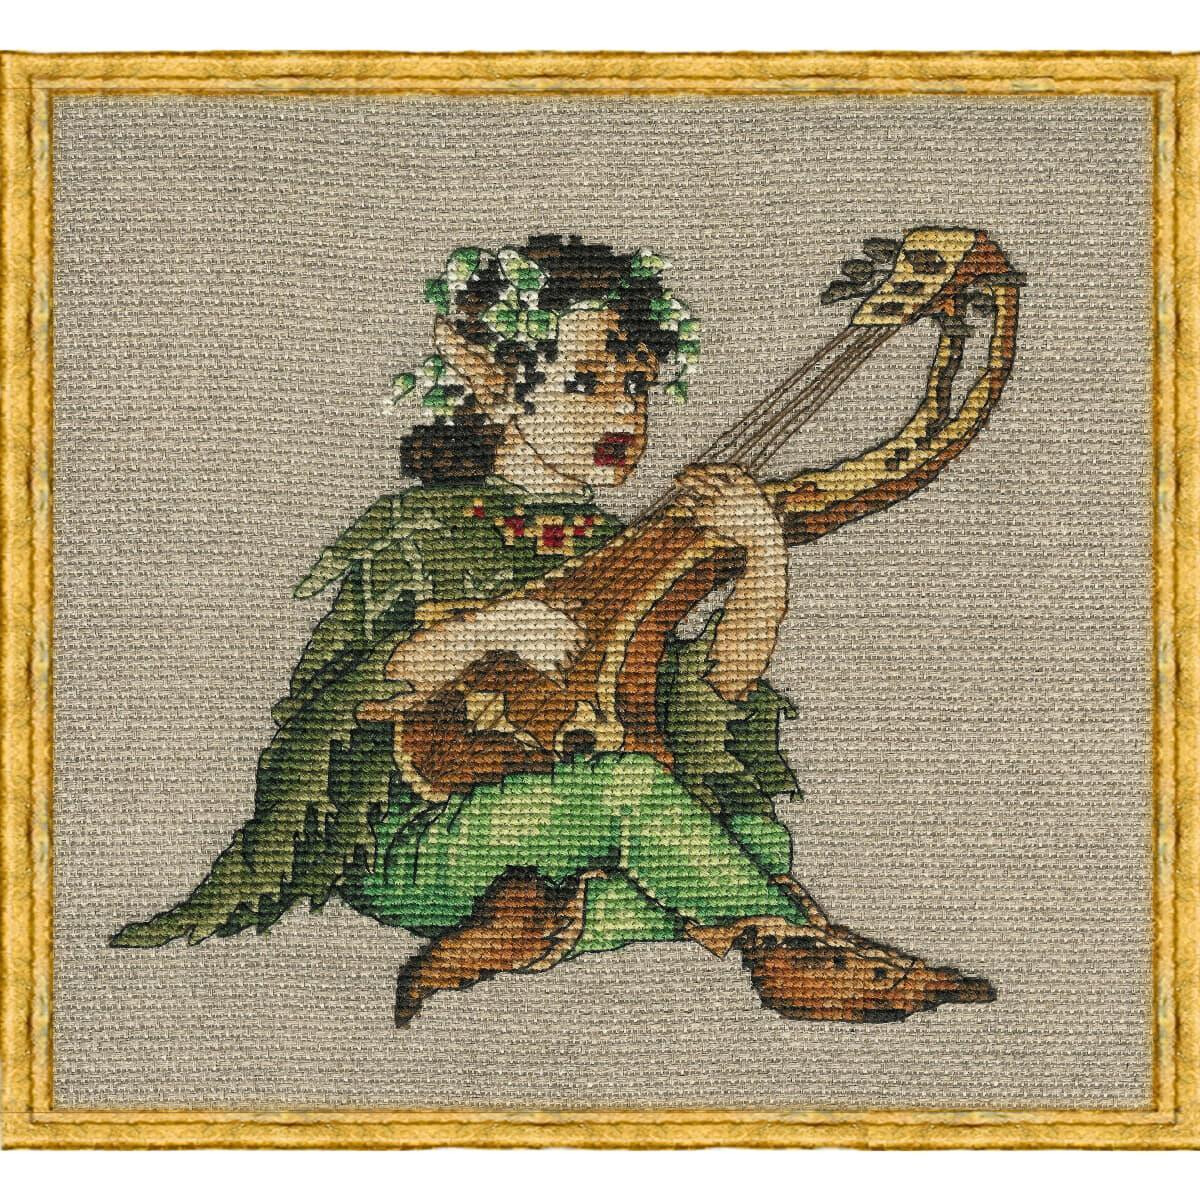 Nimue Cross Stitch counted Chart "Luthiel", 12G